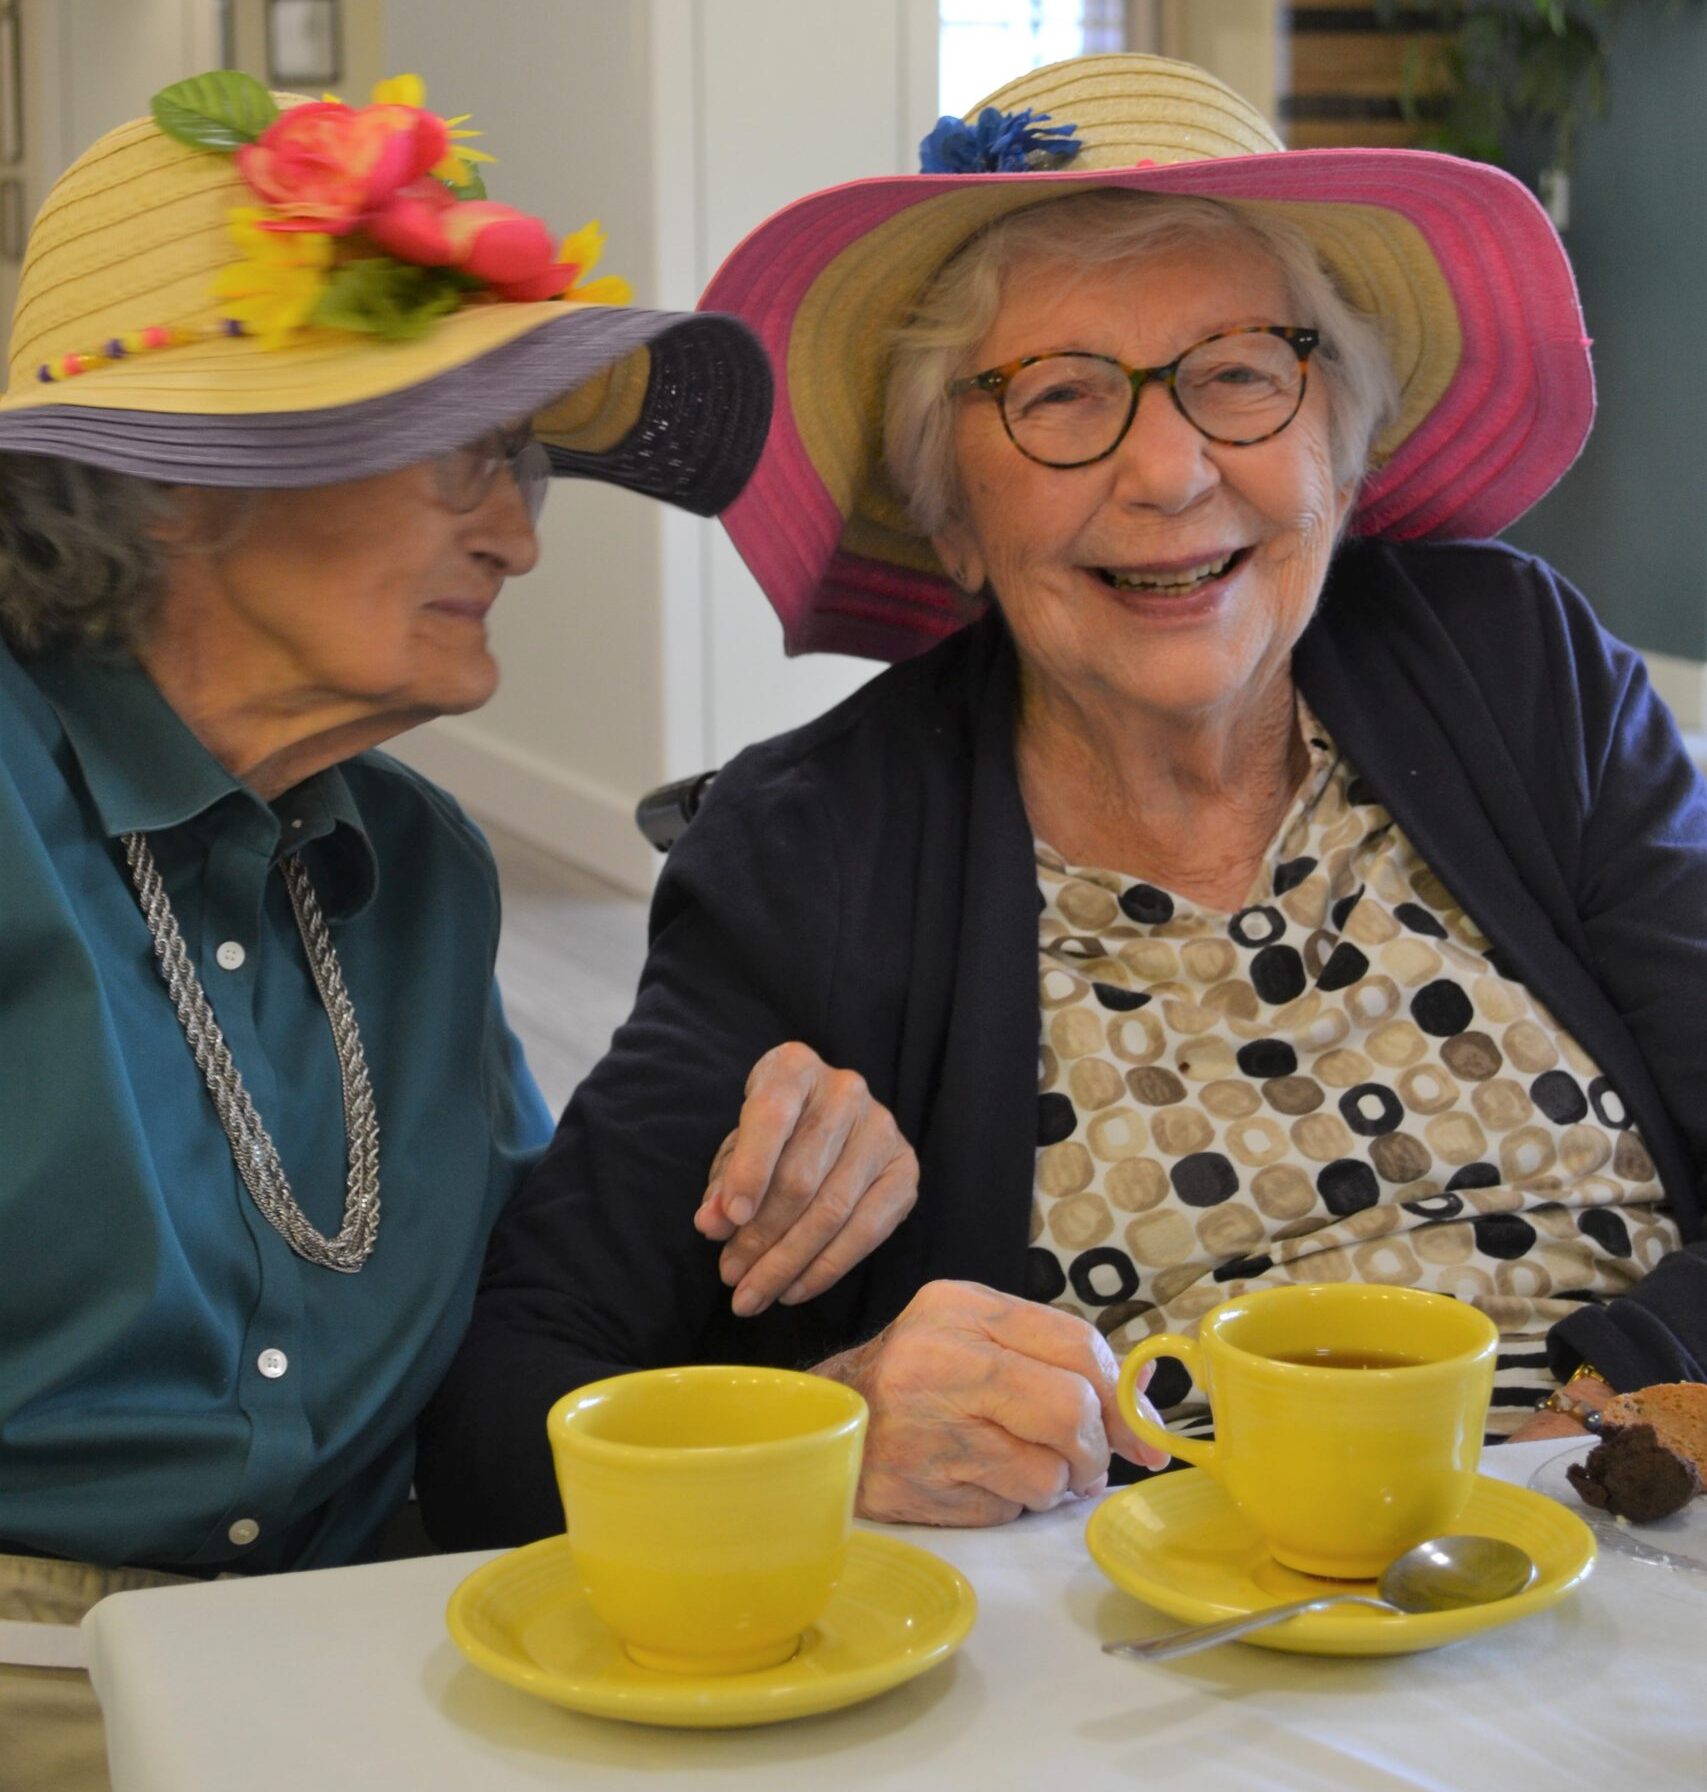 Two Memory care residents in floppy hats enjoying tea and cookies in the dining room at Abe's Garden Community